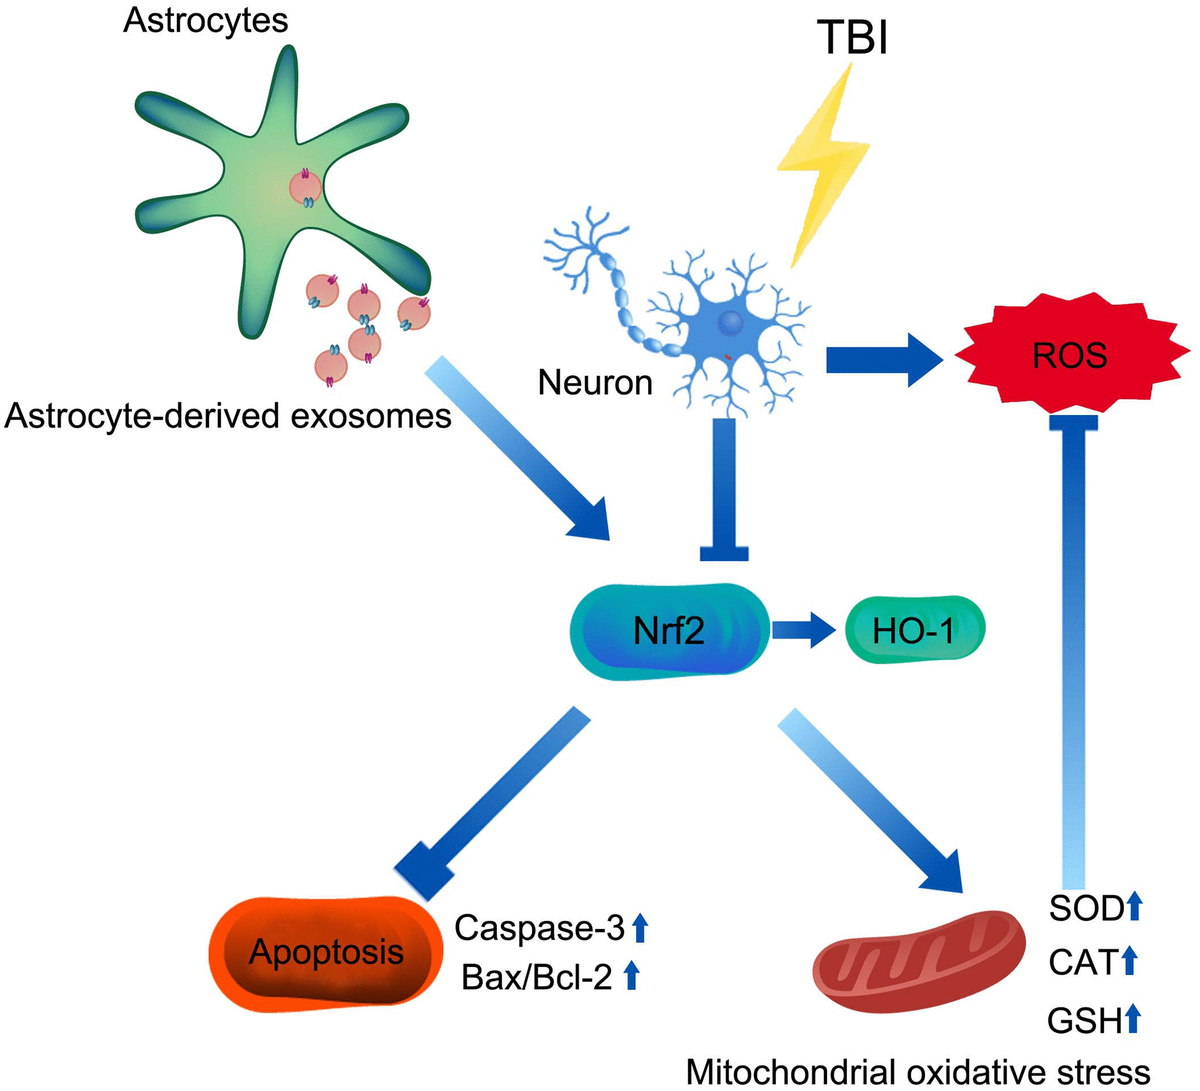 Mechanism of AS-Exos alleviating TBI-induced neuropathology. AS-Exosomes attenuate neuronal injury after TBI by inhibiting mitochondrial oxidative stress and apoptosis via activation of the Nrf2 pathway.